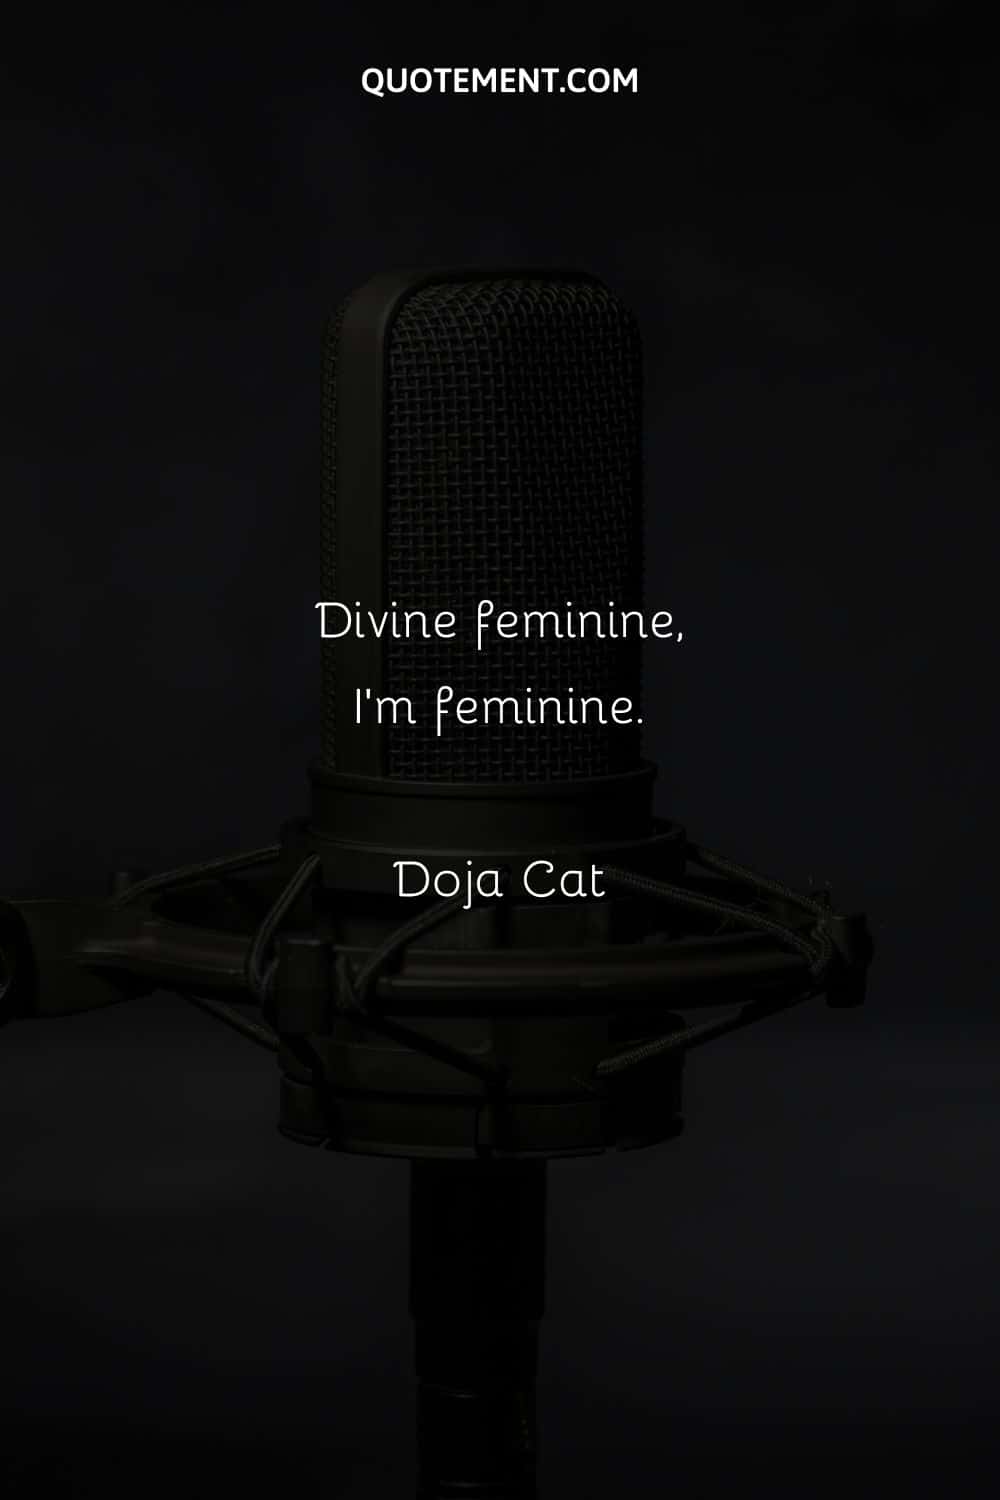 Rap caption inspired by Doja Cat and a microphone.
